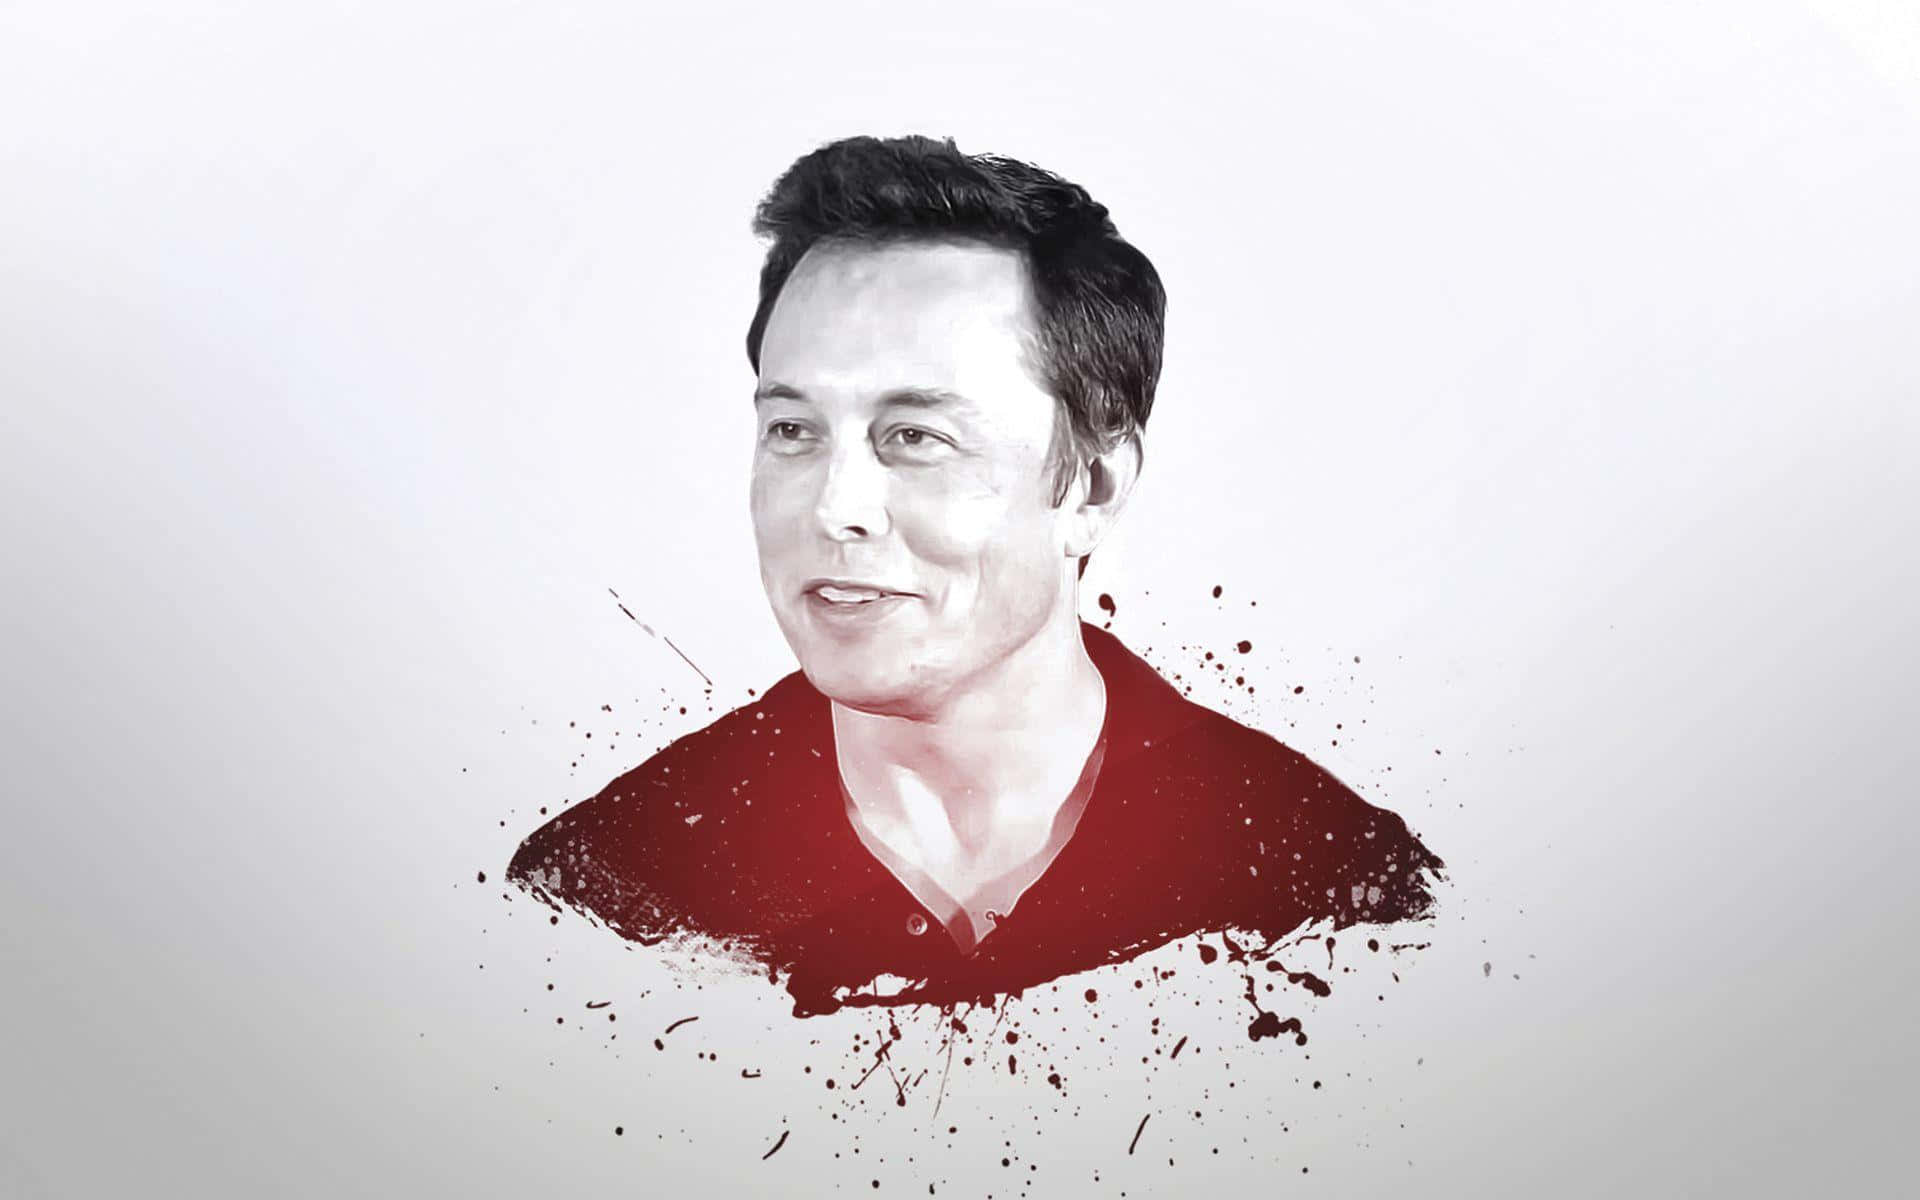 Elon Musk drives innovation and inspires the world with next-level thinking.